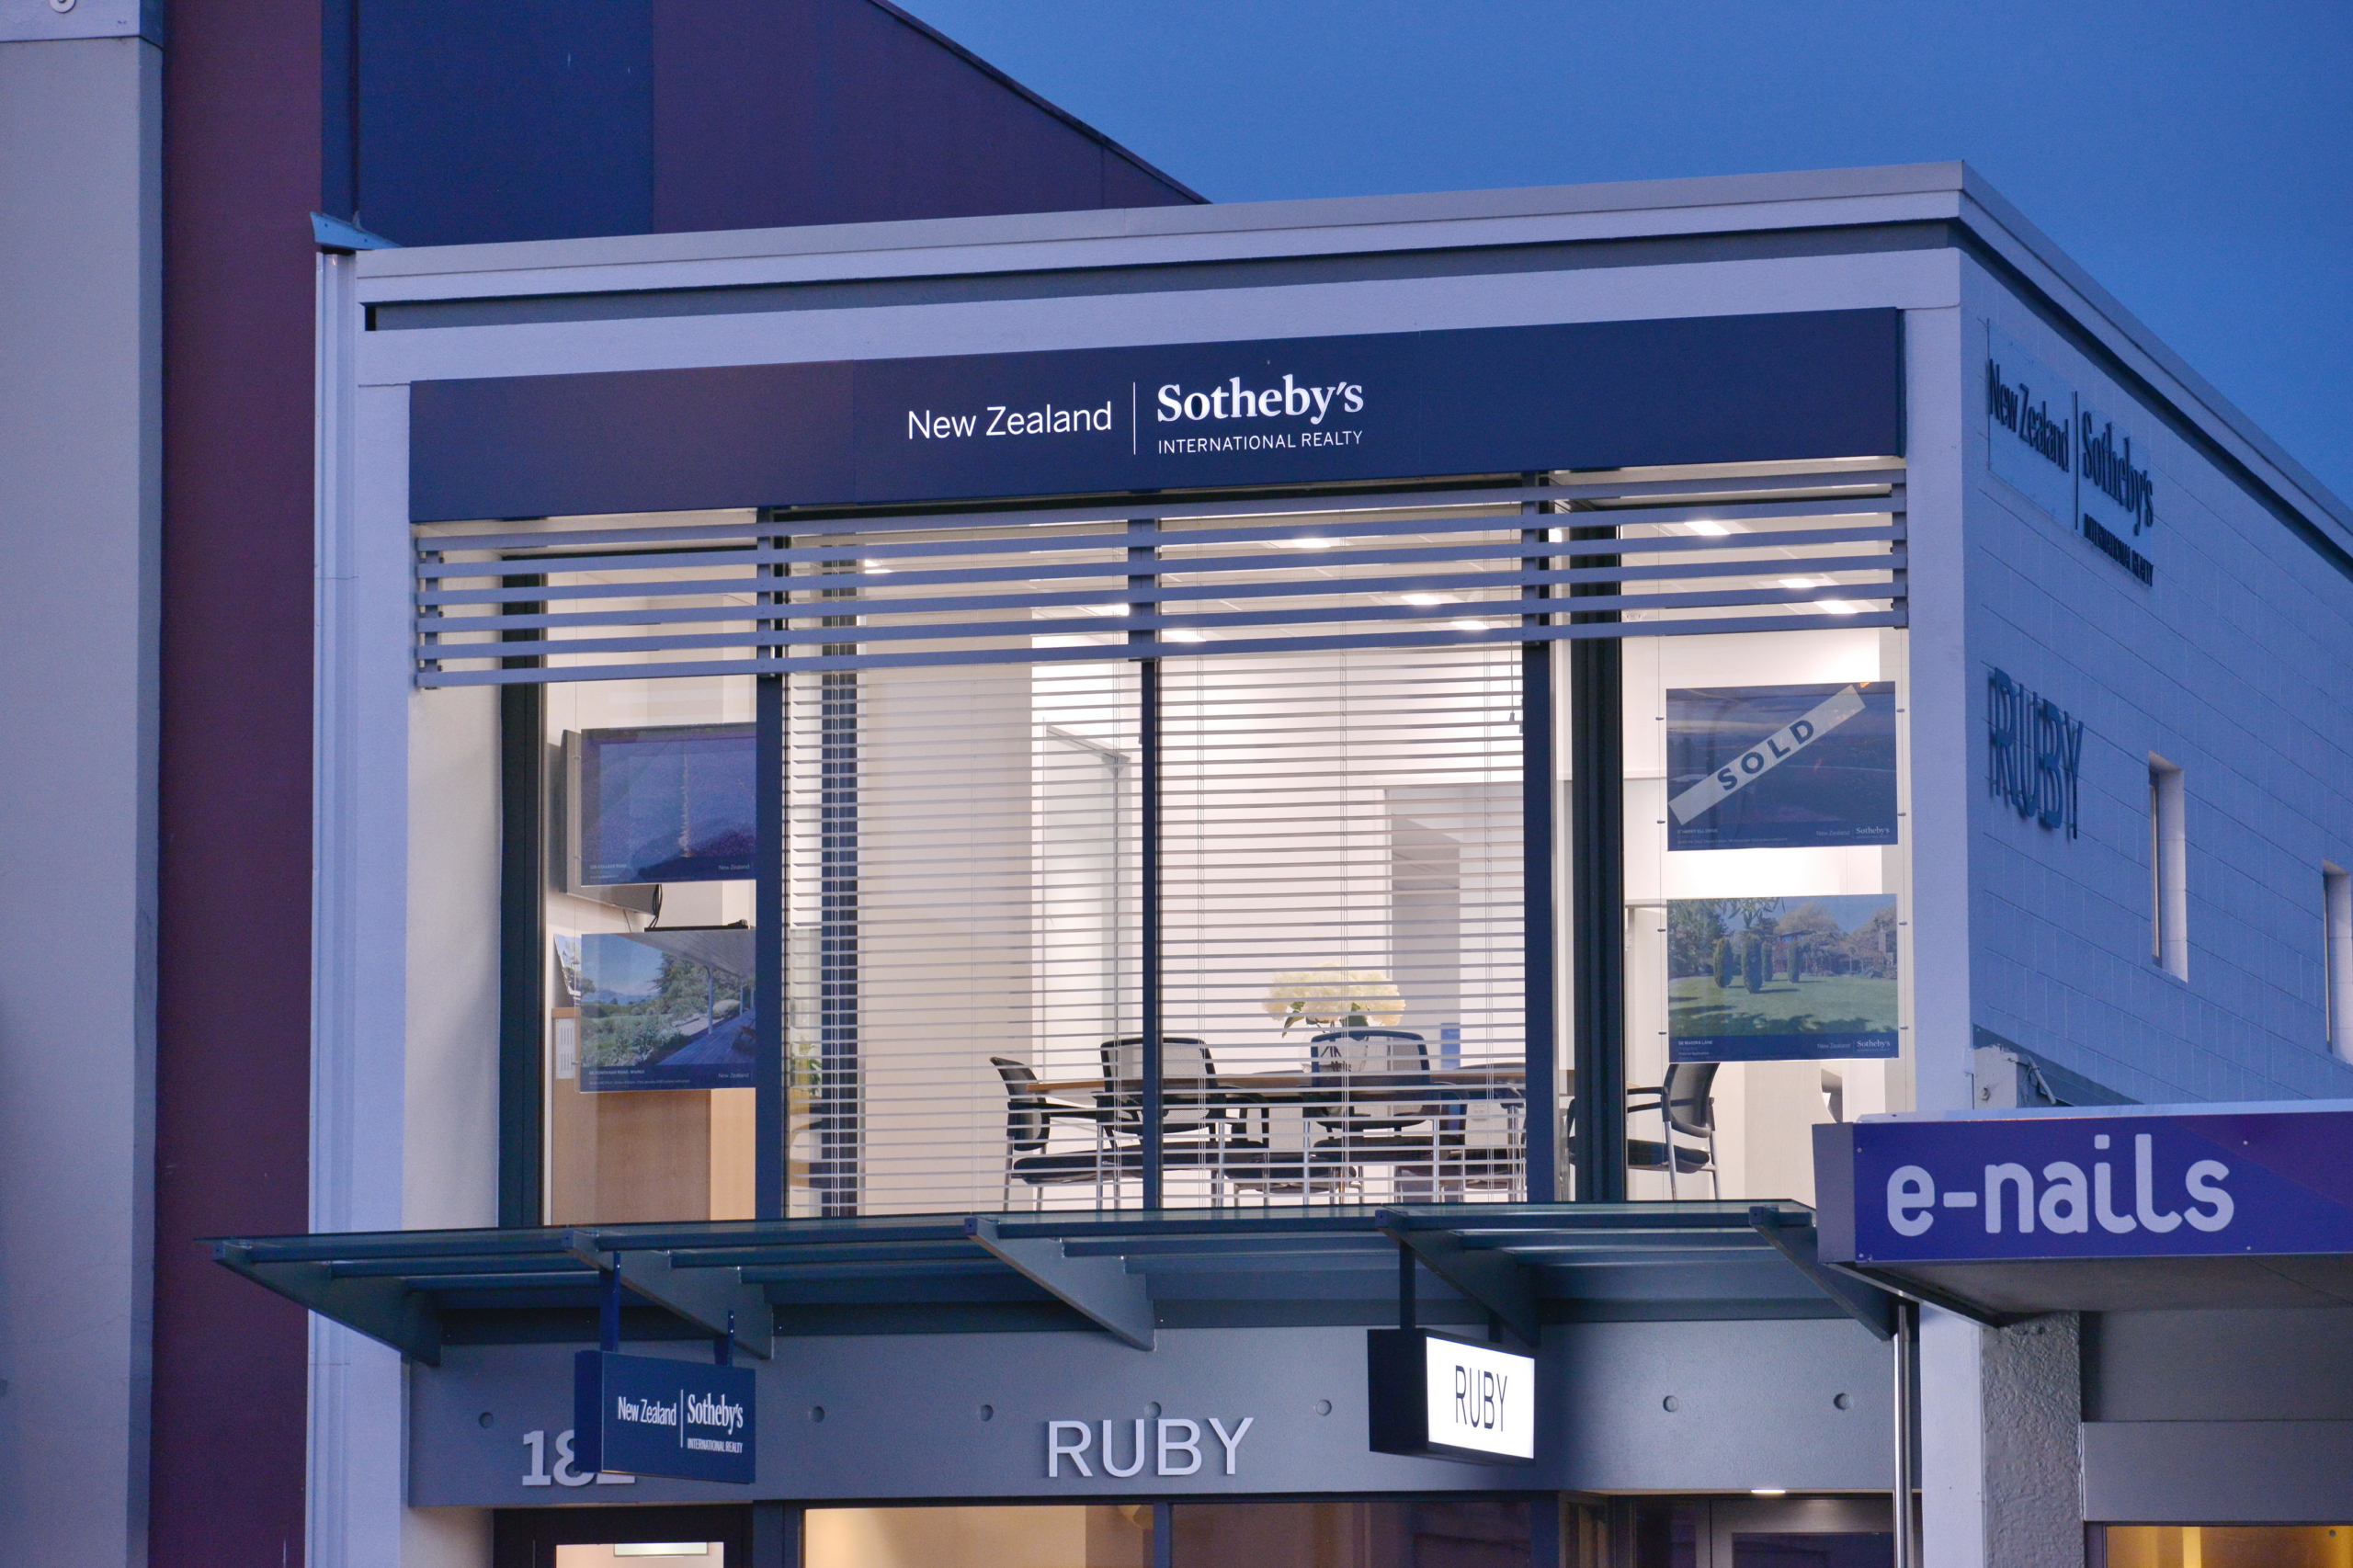 New Zealand Sotheby’s International Realty moves back to central Christchurch